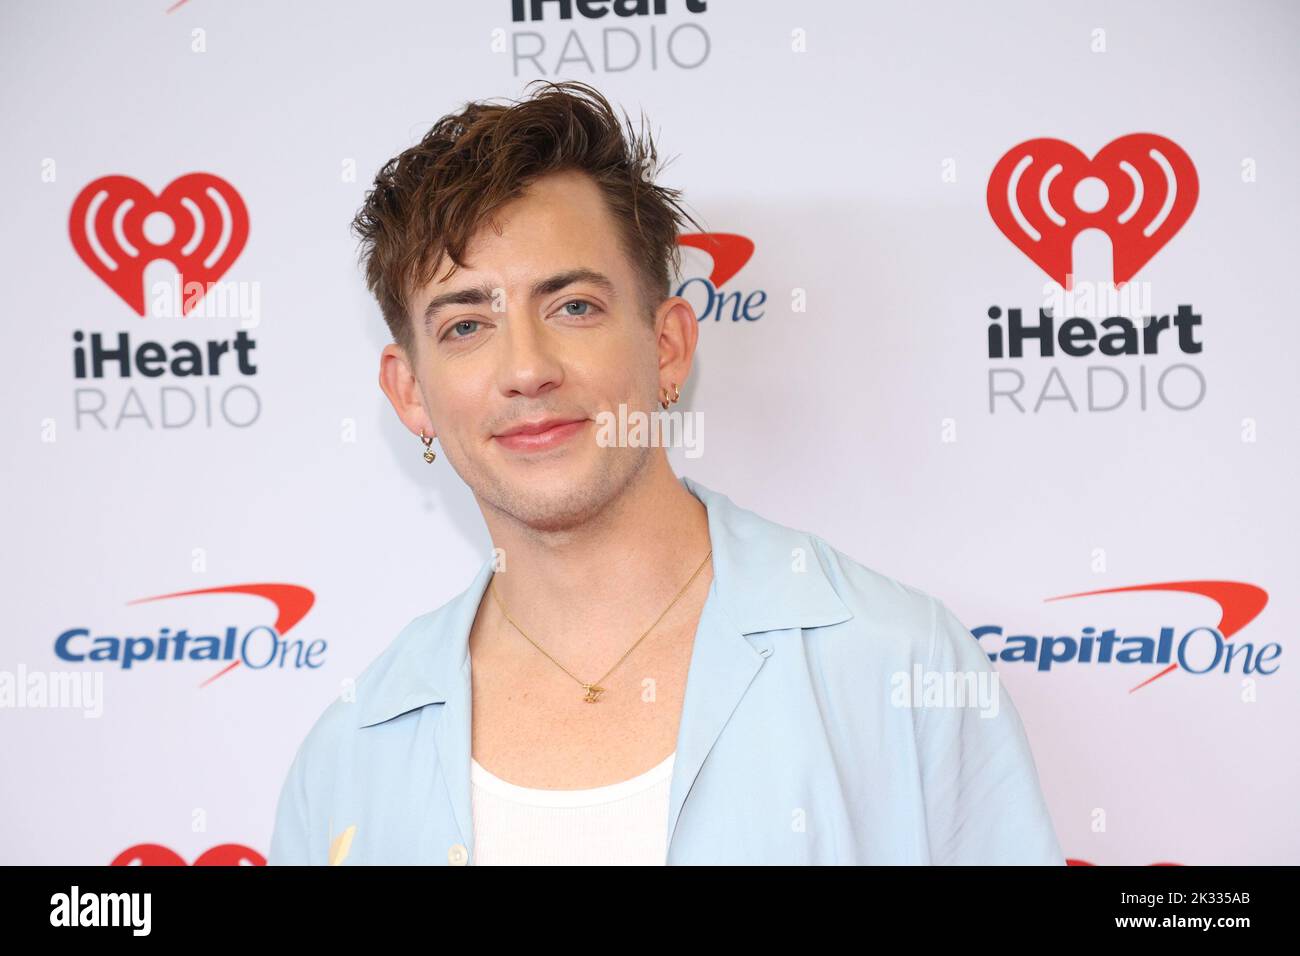 Las Vegas, United States. 23rd Sep, 2022. Actor Kevin McHale arrives for the iHeartRadio Music Festival at T-Mobile Arena in Las Vegas, Nevada on Friday, September 23, 2022. Photo by James Atoa/UPI Credit: UPI/Alamy Live News Stock Photo